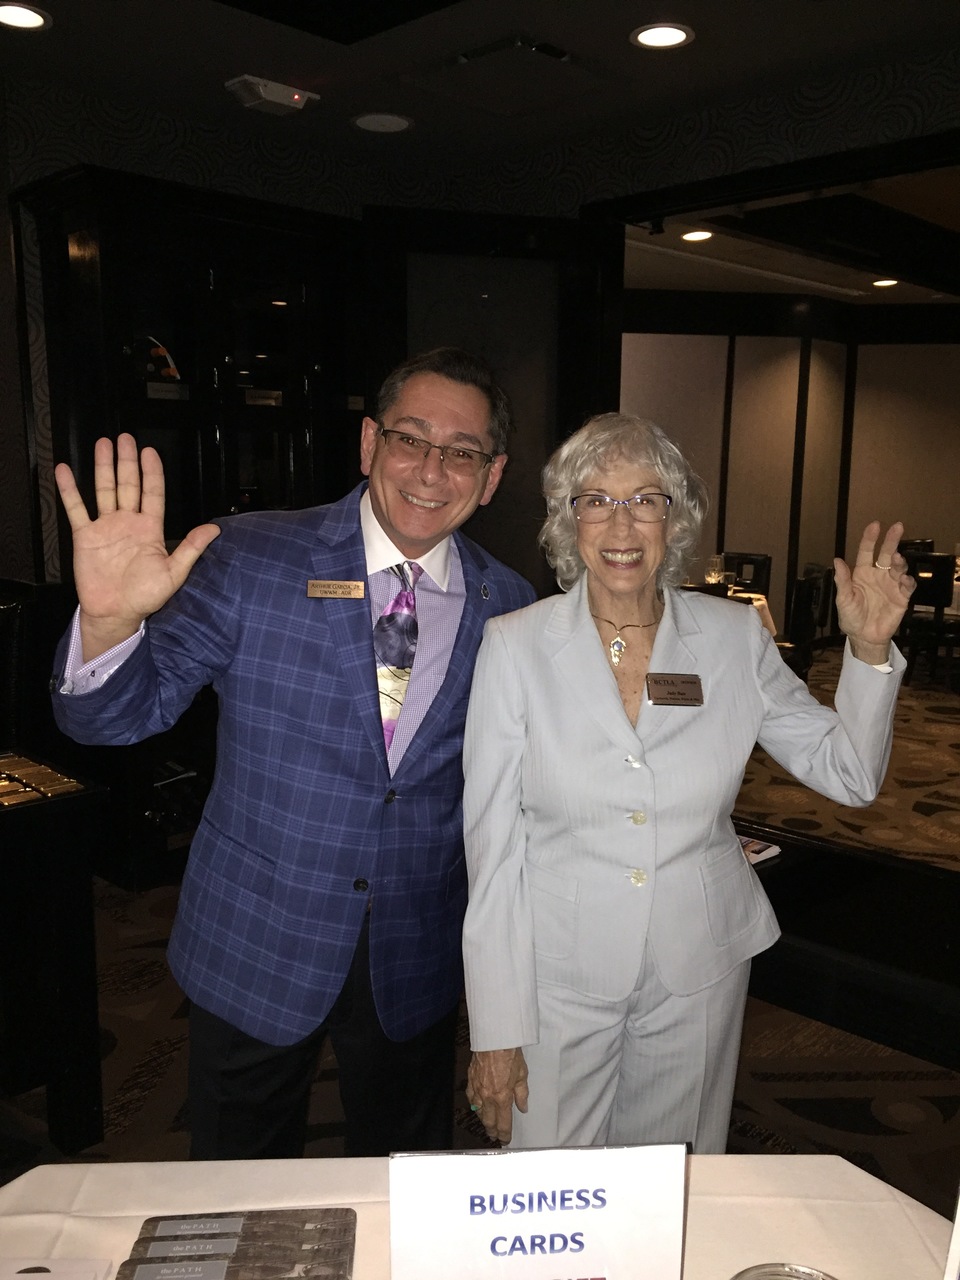 Art Garcia and Judy Bass are ready for the Meet and Greet /Sponsor Showcase.